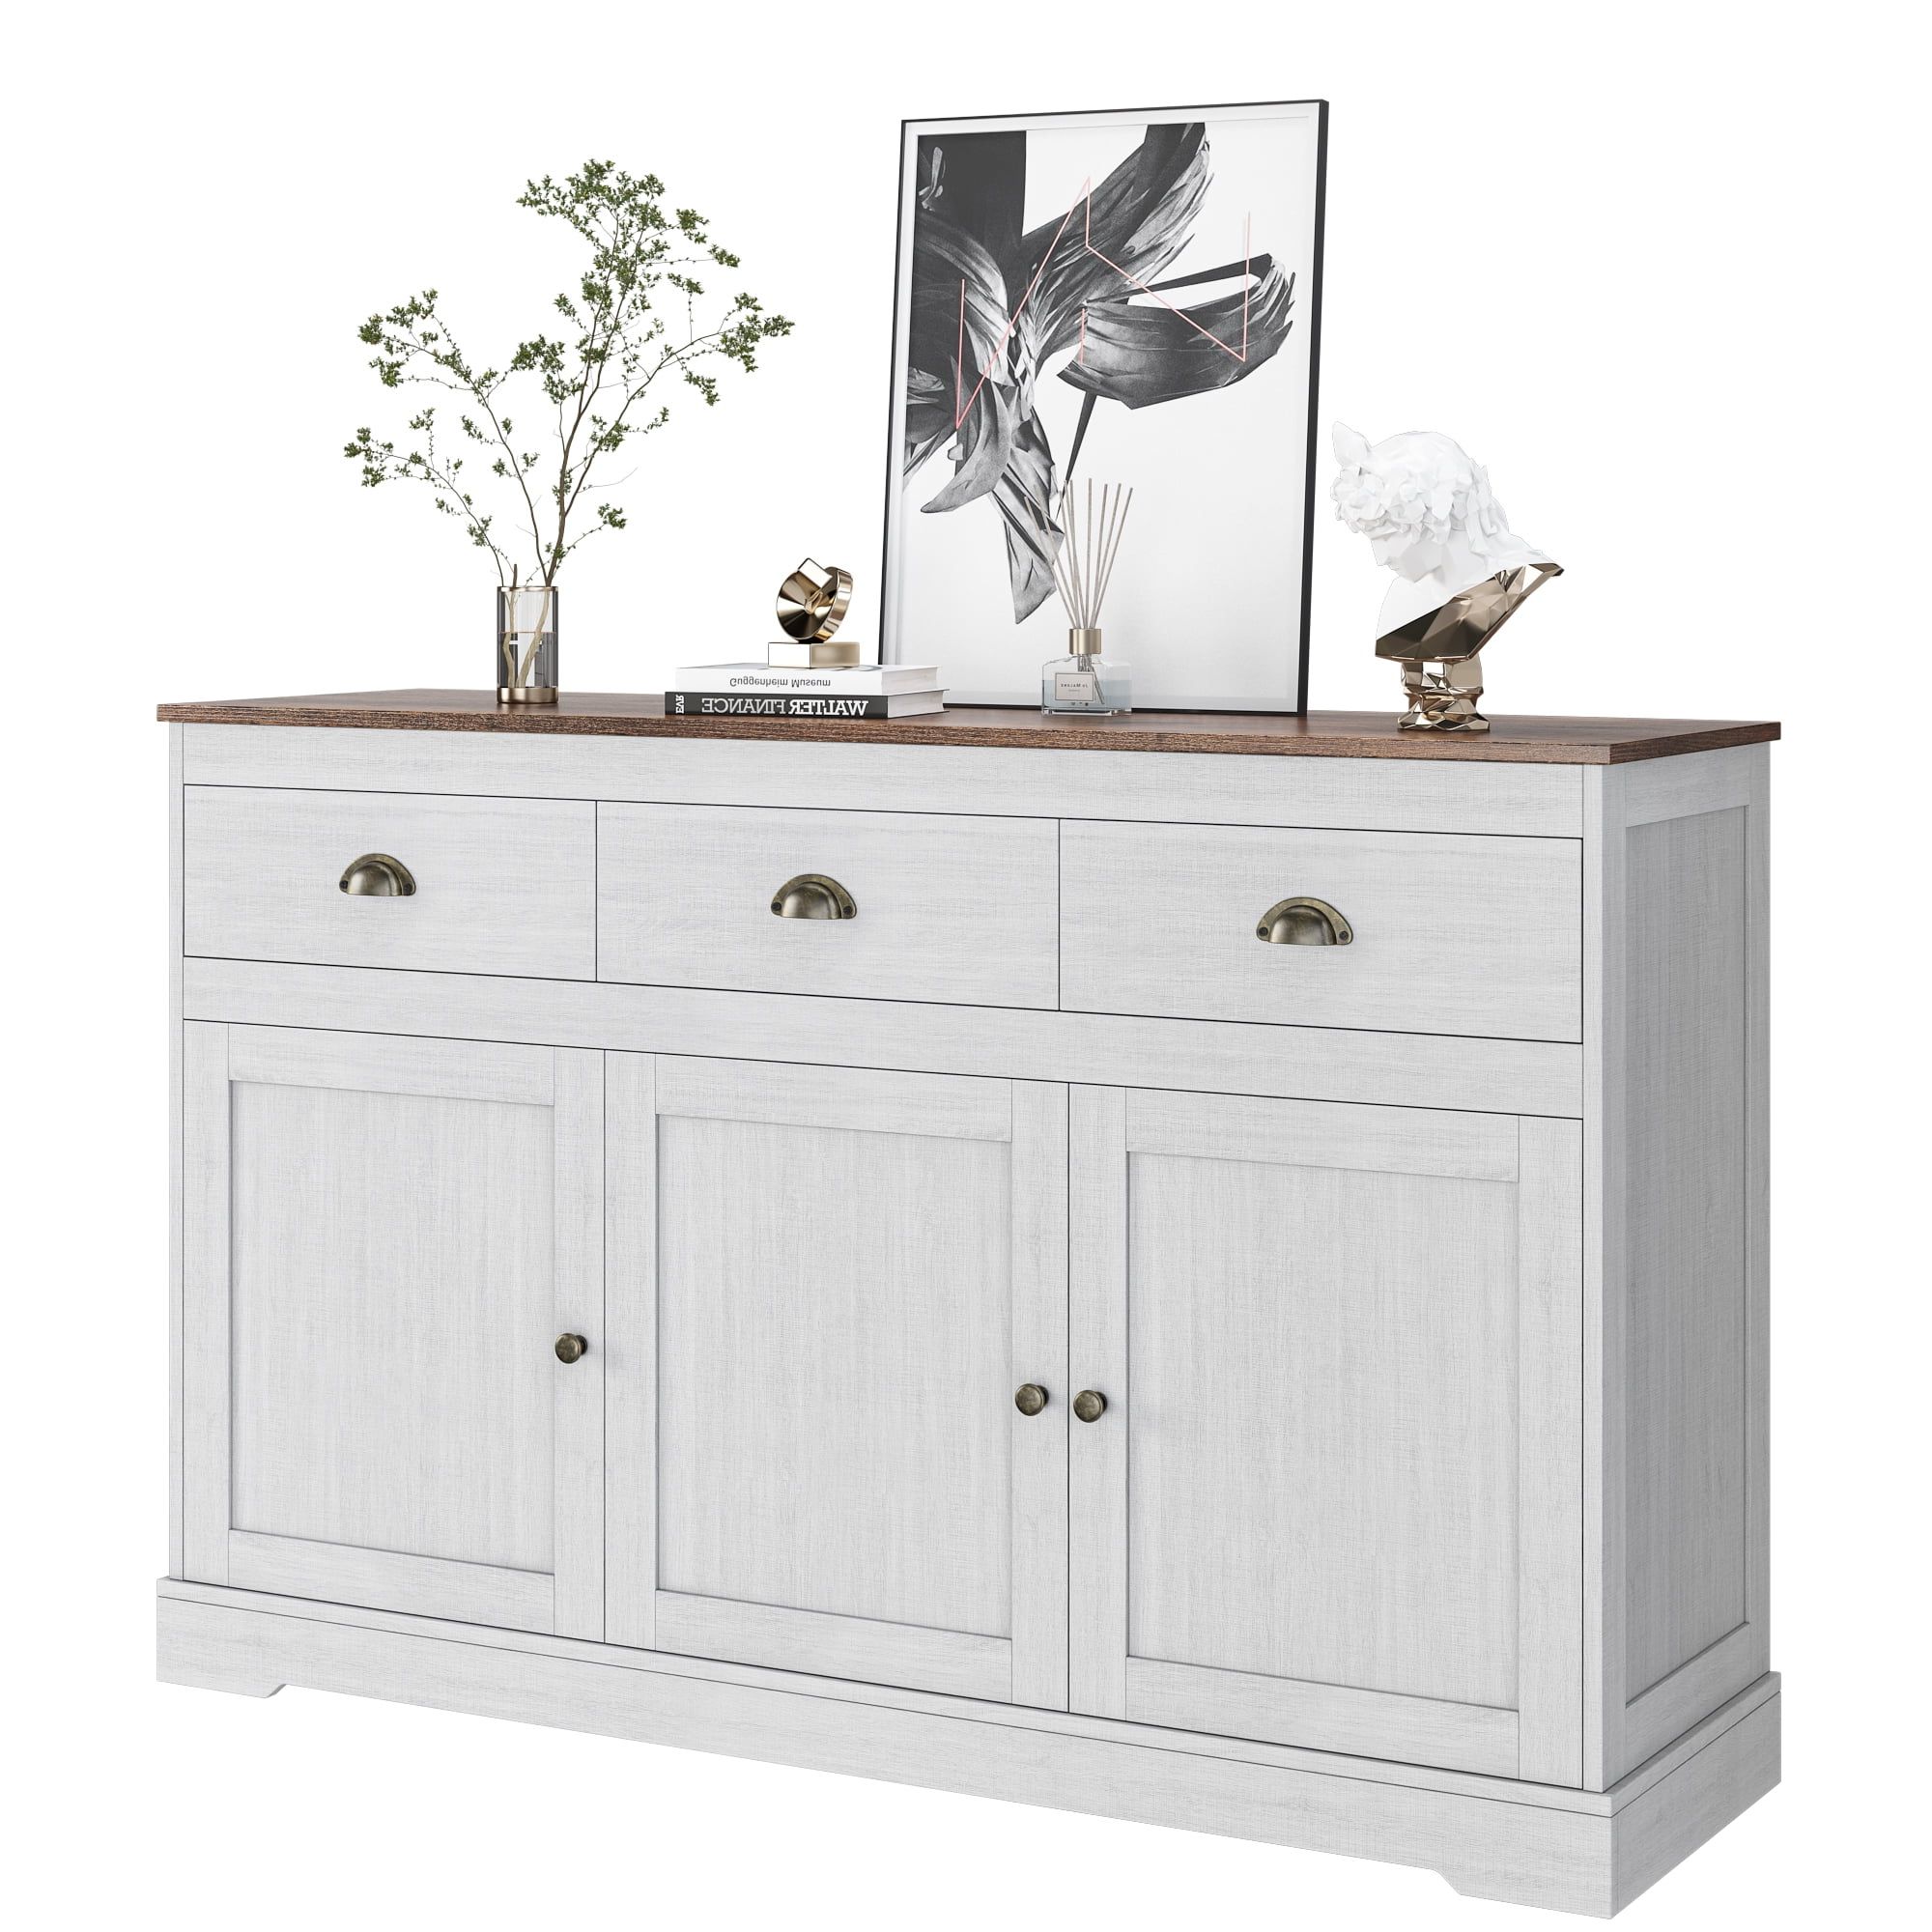 Sideboard Storage Cabinet With 3 Drawers & 3 Doors Intended For Well Known Homfa Sideboard Storage Cabinet With 3 Drawers & 3 Doors, 47.2'' Wide Buffet  Cabinet For Dining Room, Antique White – Walmart (Photo 1 of 10)